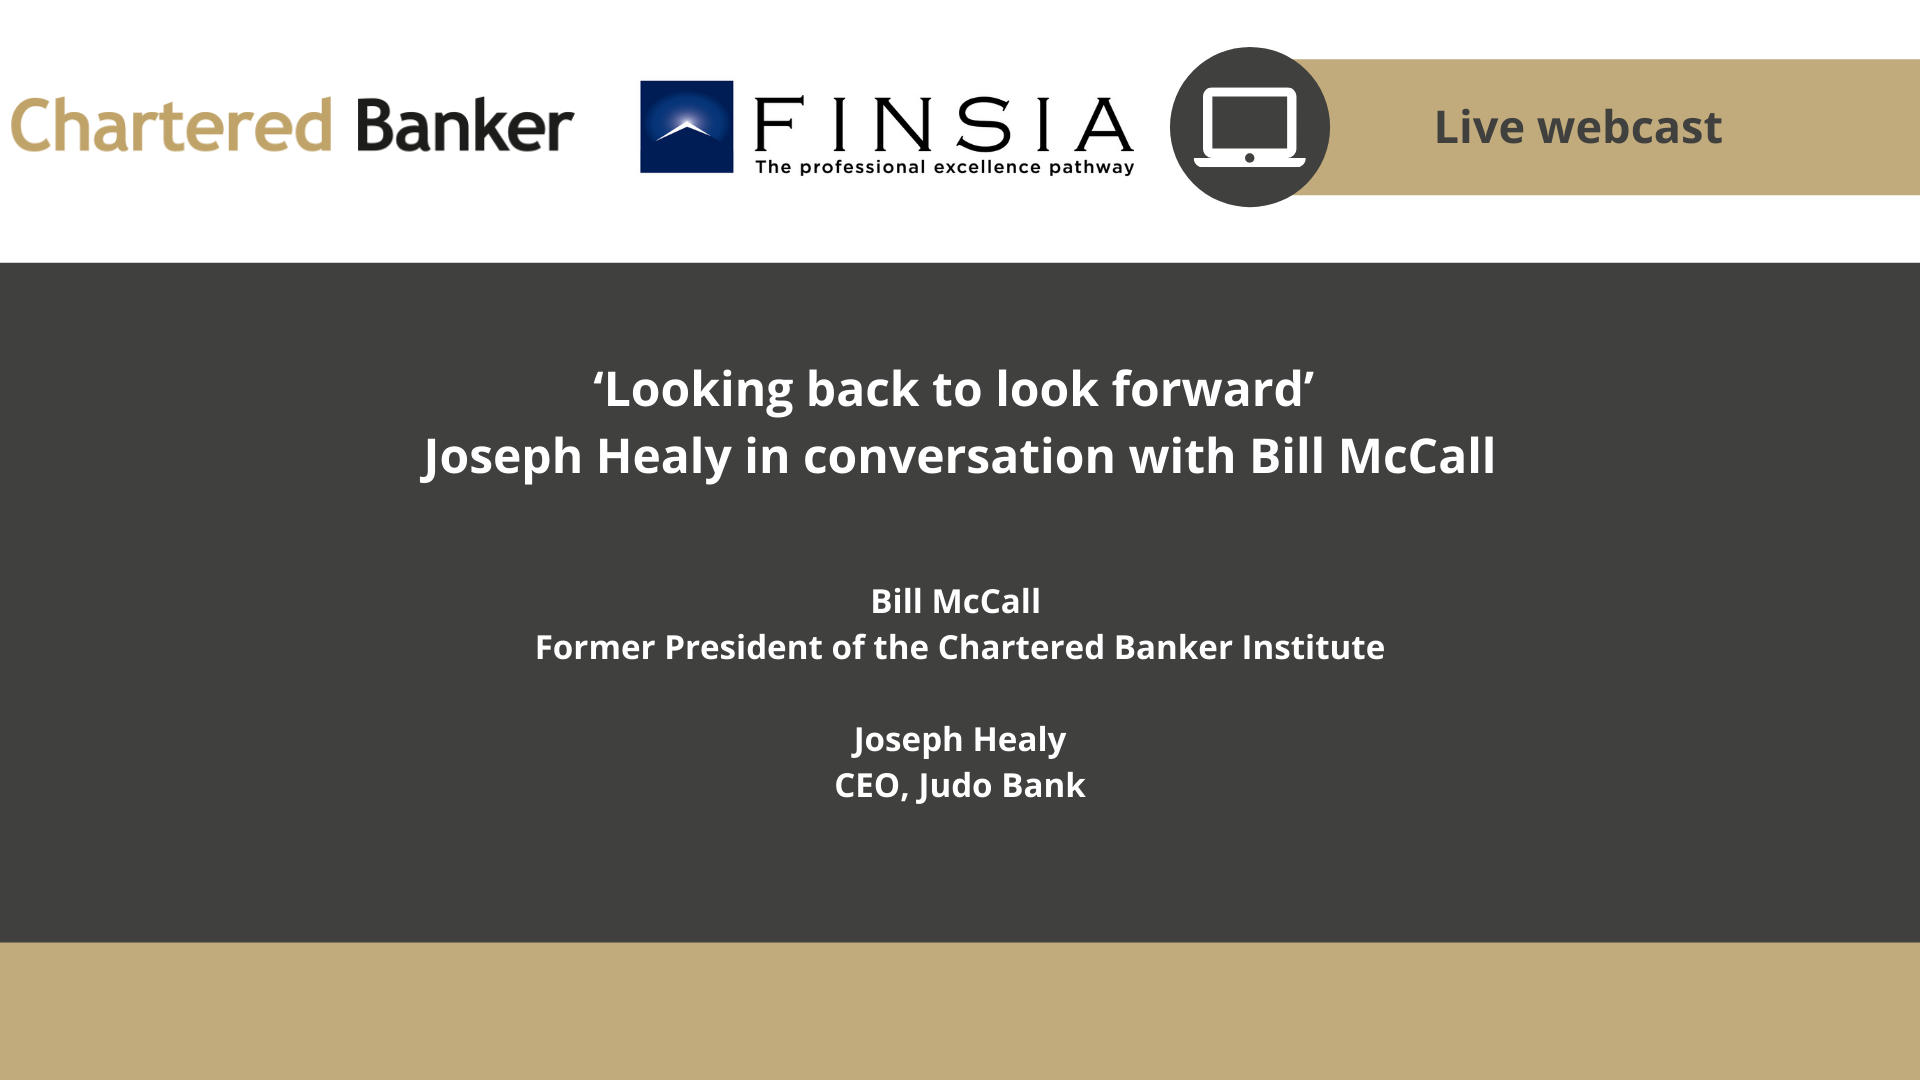 ‘Looking back to look forward’ Joseph Healy in conversation with Bill McCall